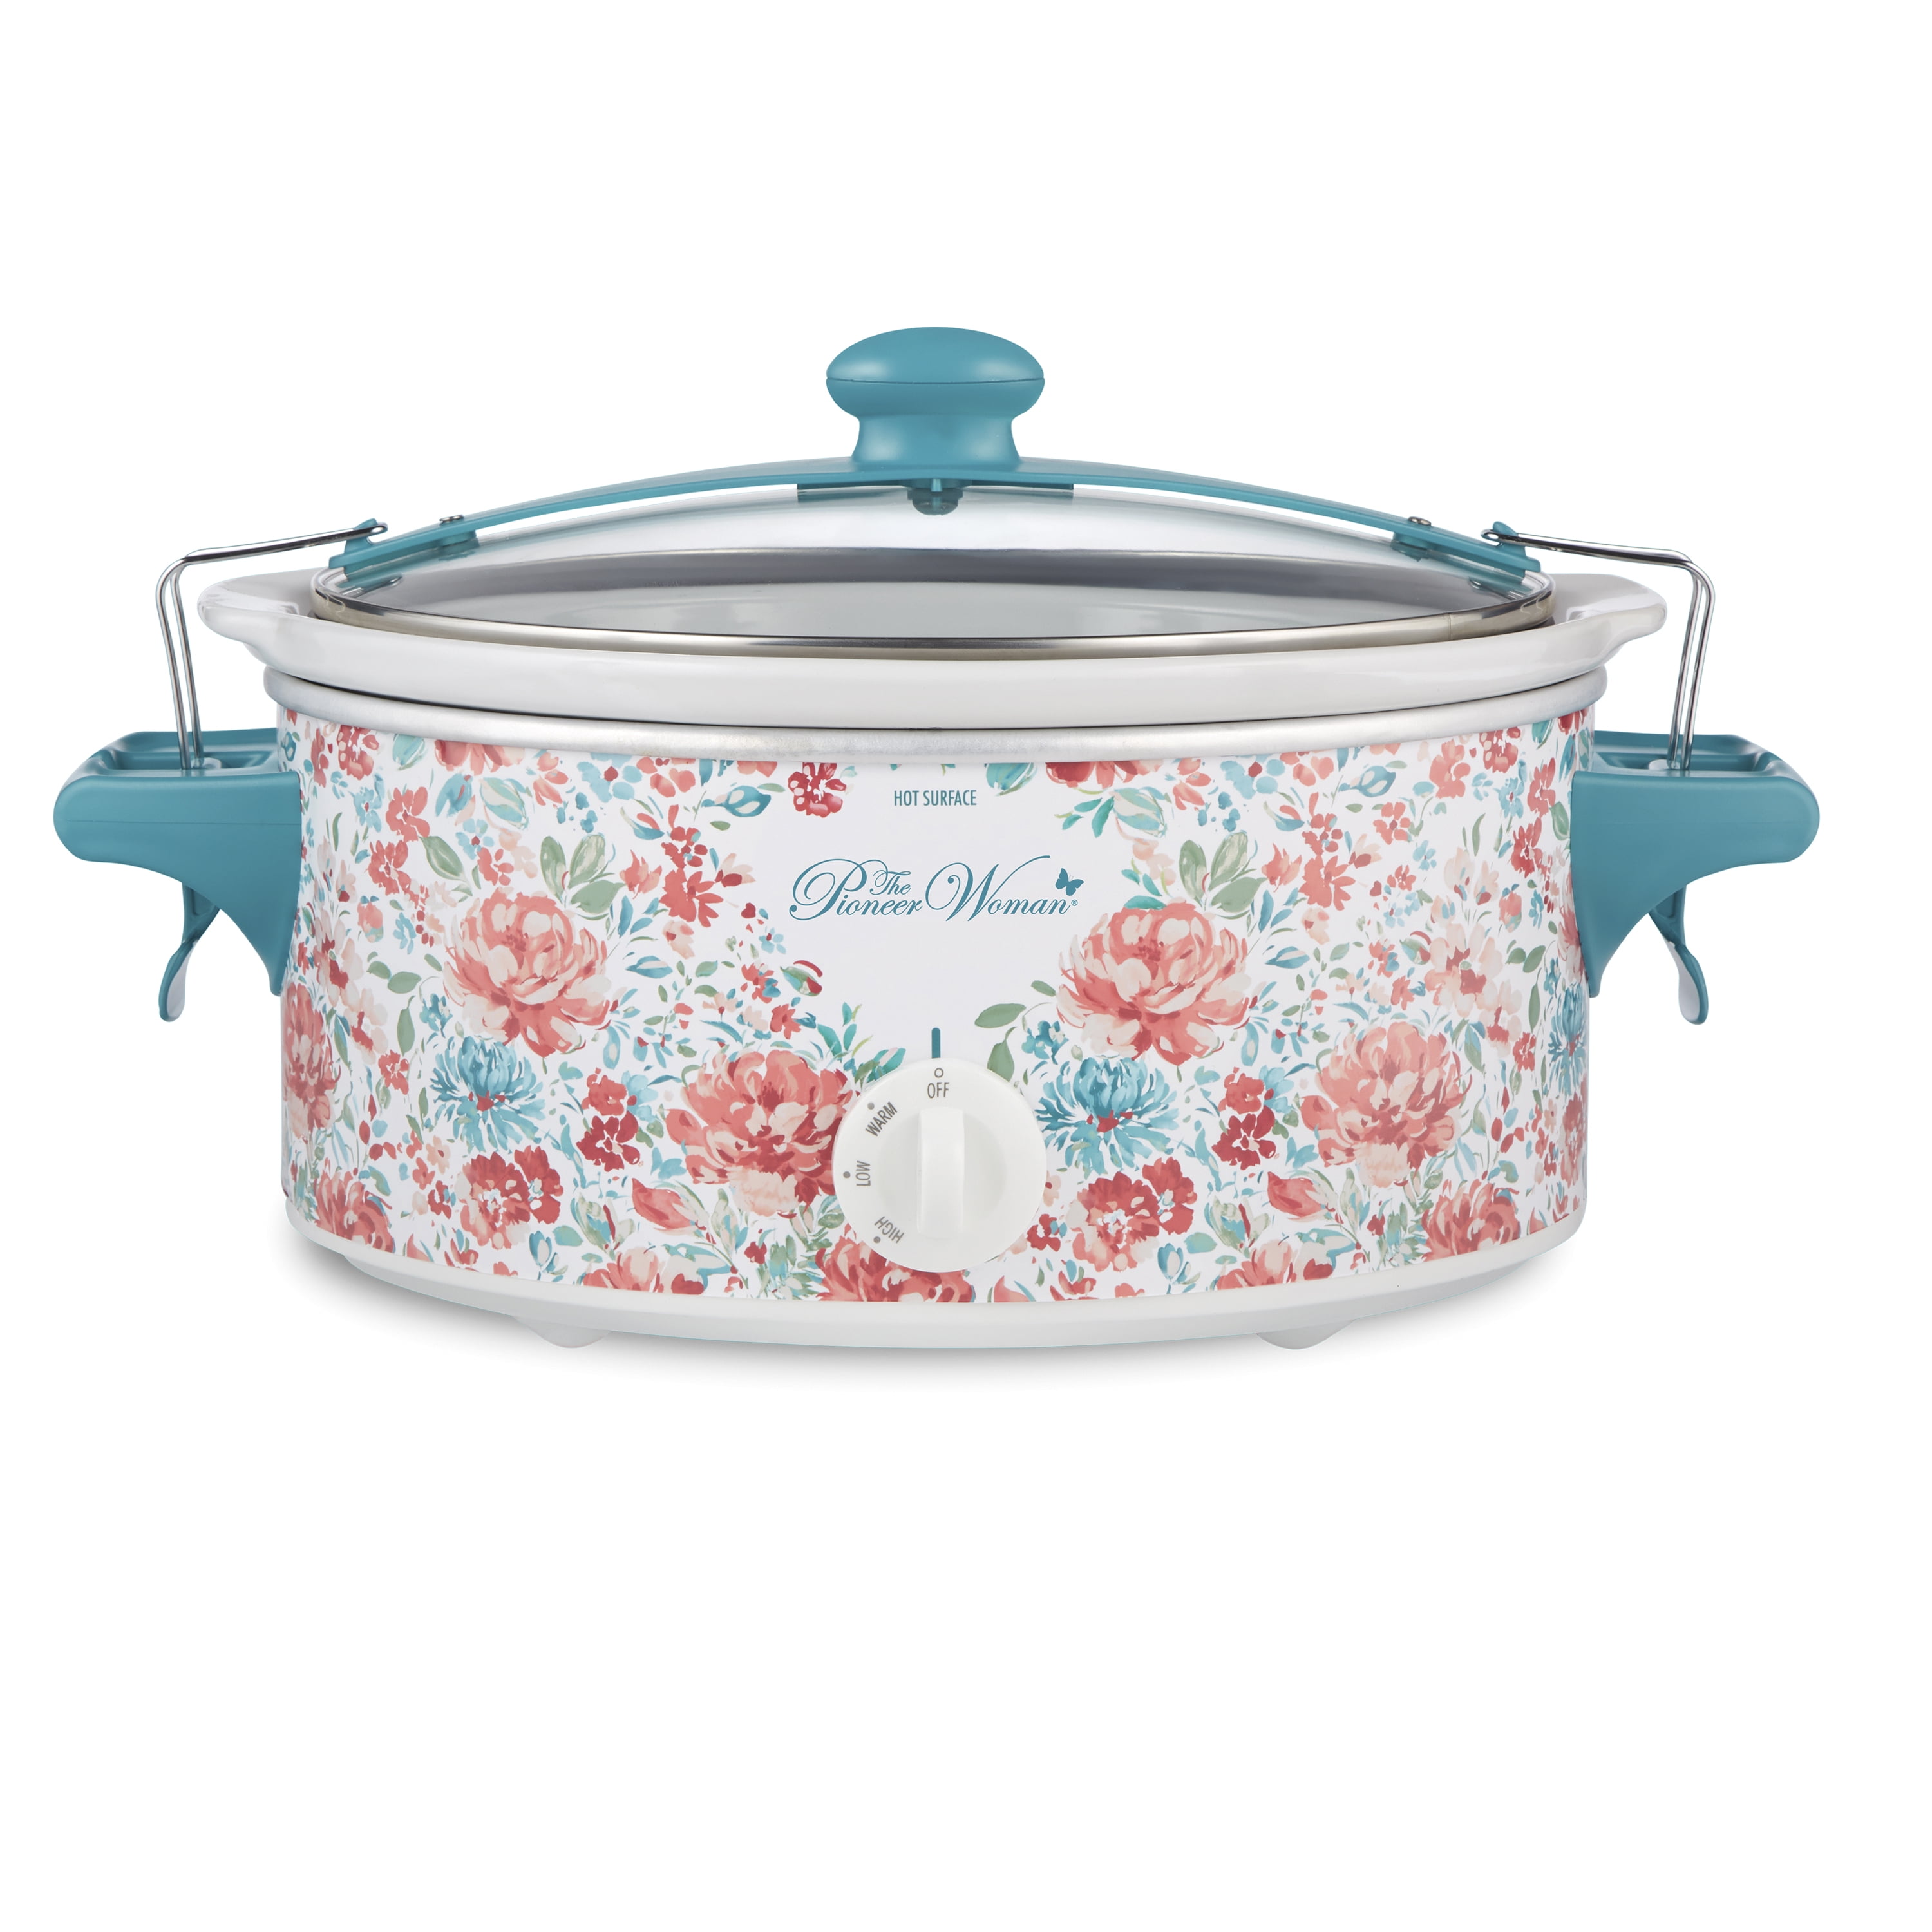 Pioneer Woman Portable Slow Cooker Fiona Floral, 5 Quart